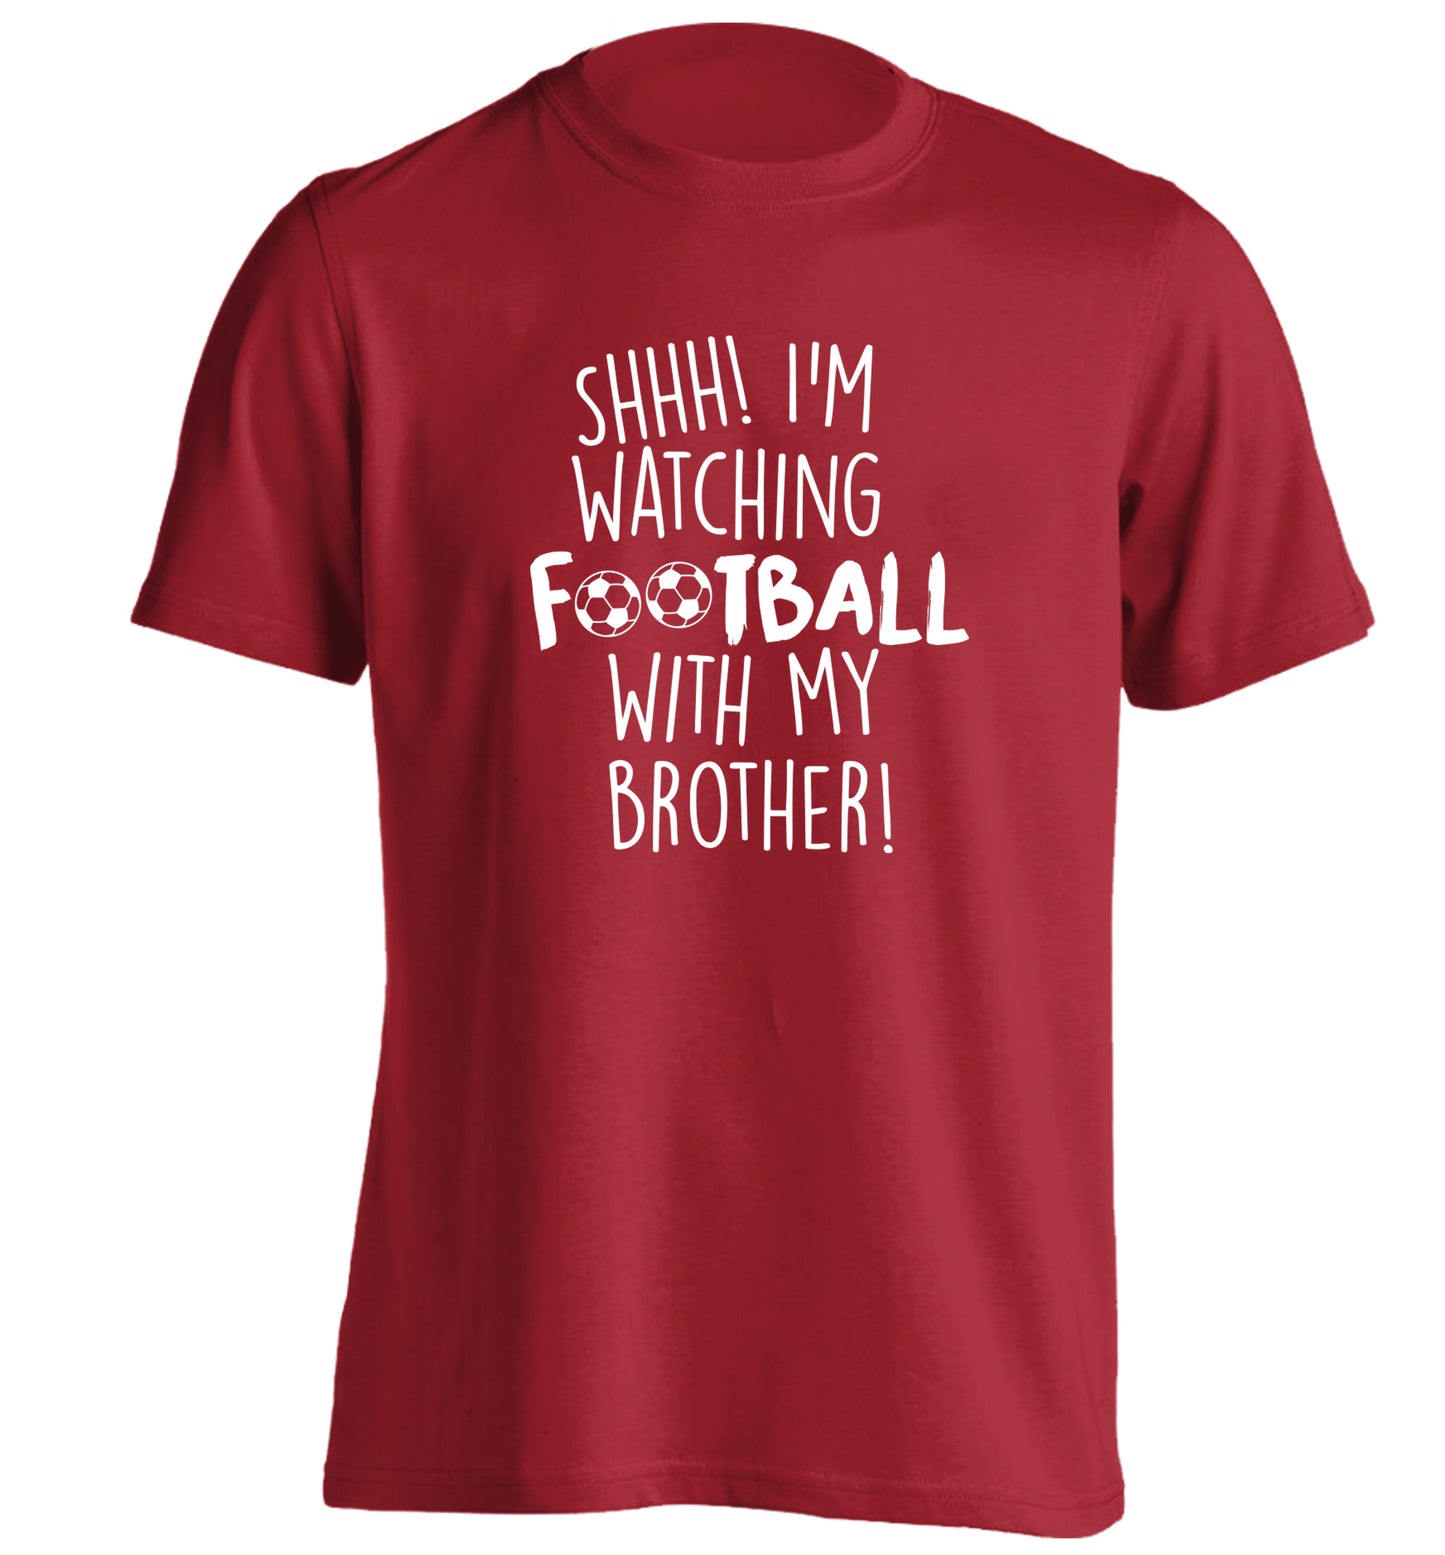 Shhh I'm watching football with my brother adults unisexred Tshirt 2XL